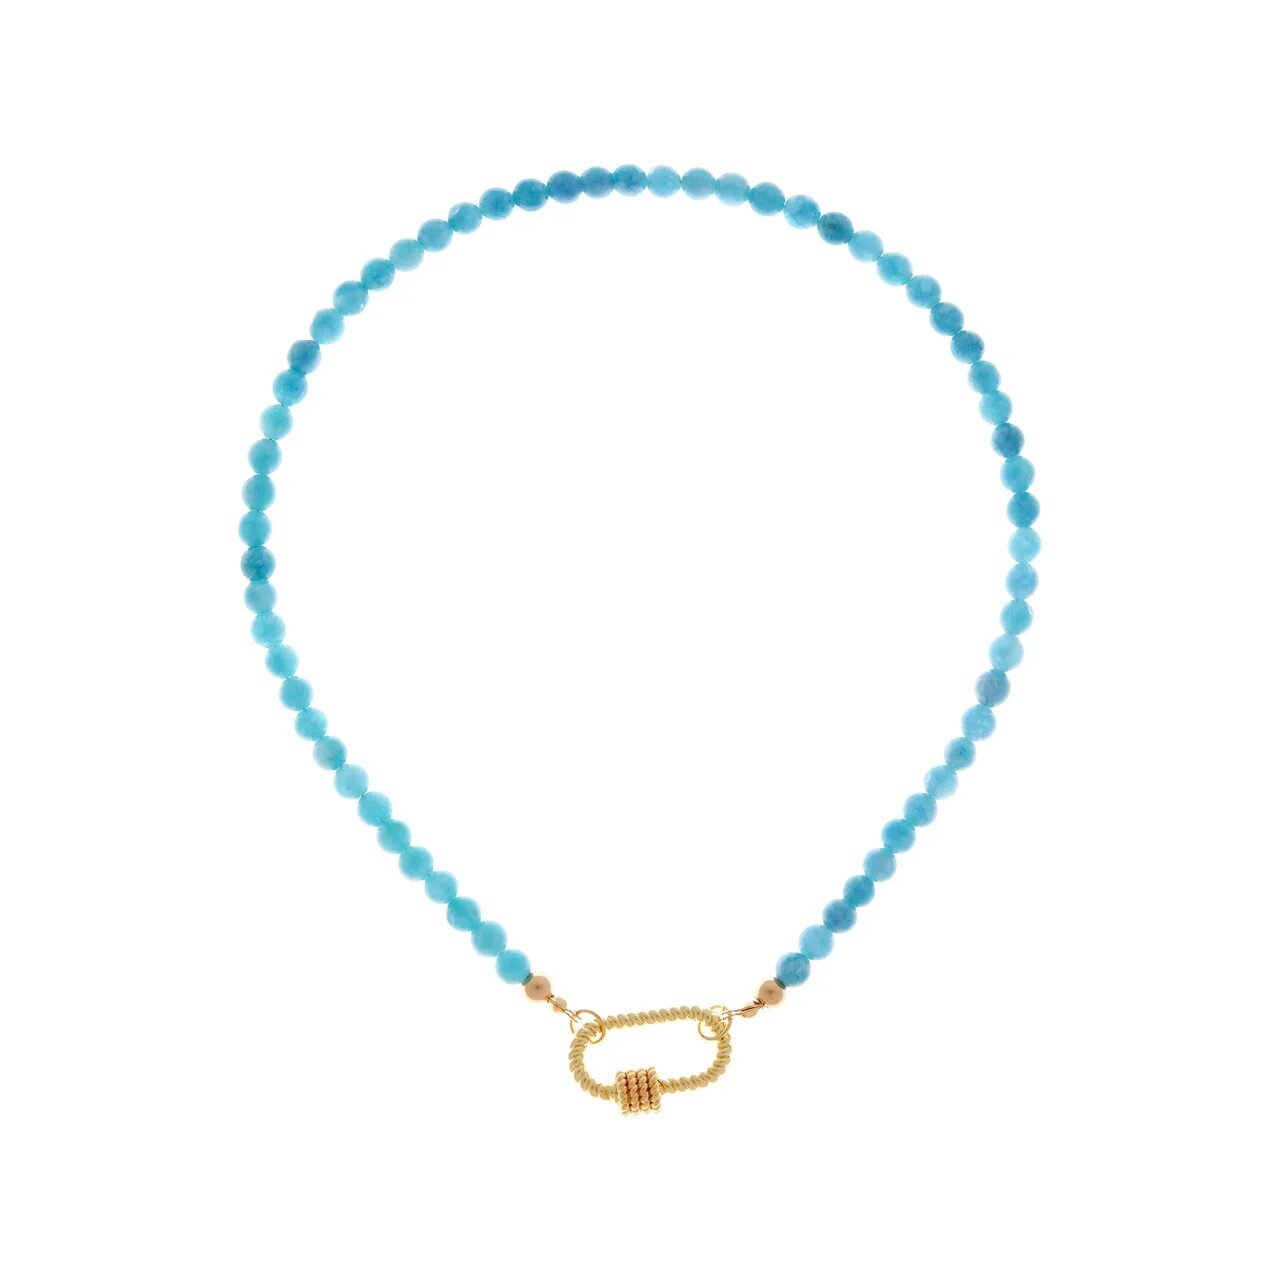 HOLLY JUNE Колье Carabiner Gold Turquoise Necklace колье holly june turquoise star necklace